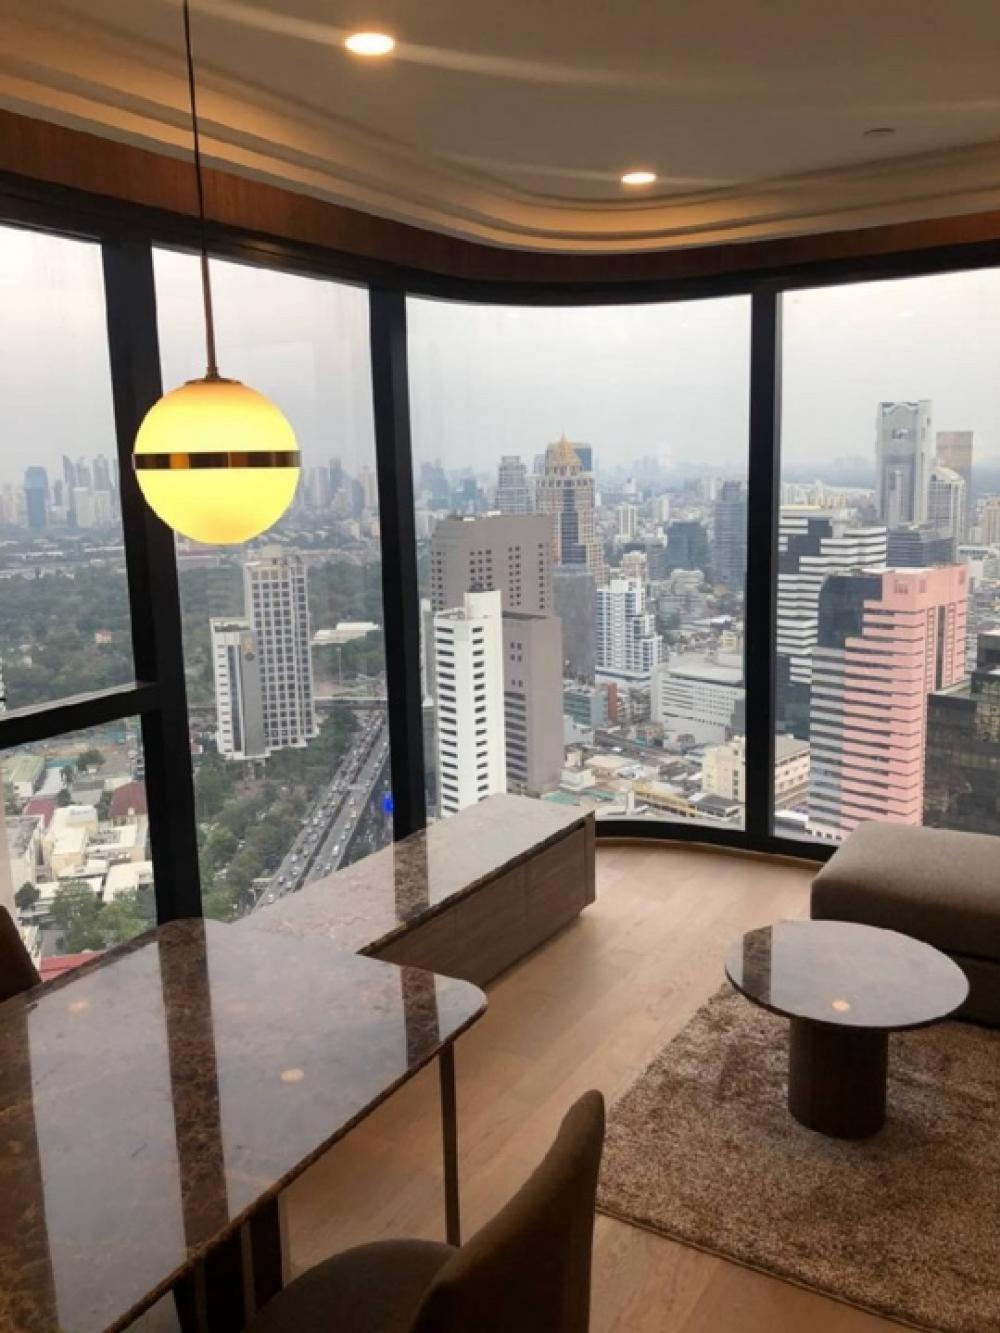 For SaleCondoSiam Paragon ,Chulalongkorn,Samyan : Urgent sale 😊😊. Ashton Chula-Silom, size 2 bedrooms, 1 bathroom, Suan Lump Wing. Price 16,200,000 baht, beautiful new room, fully furnished, ready - size 55 sq m - free transfer day expenses, purchase through project sales. If interested, contact 06265628